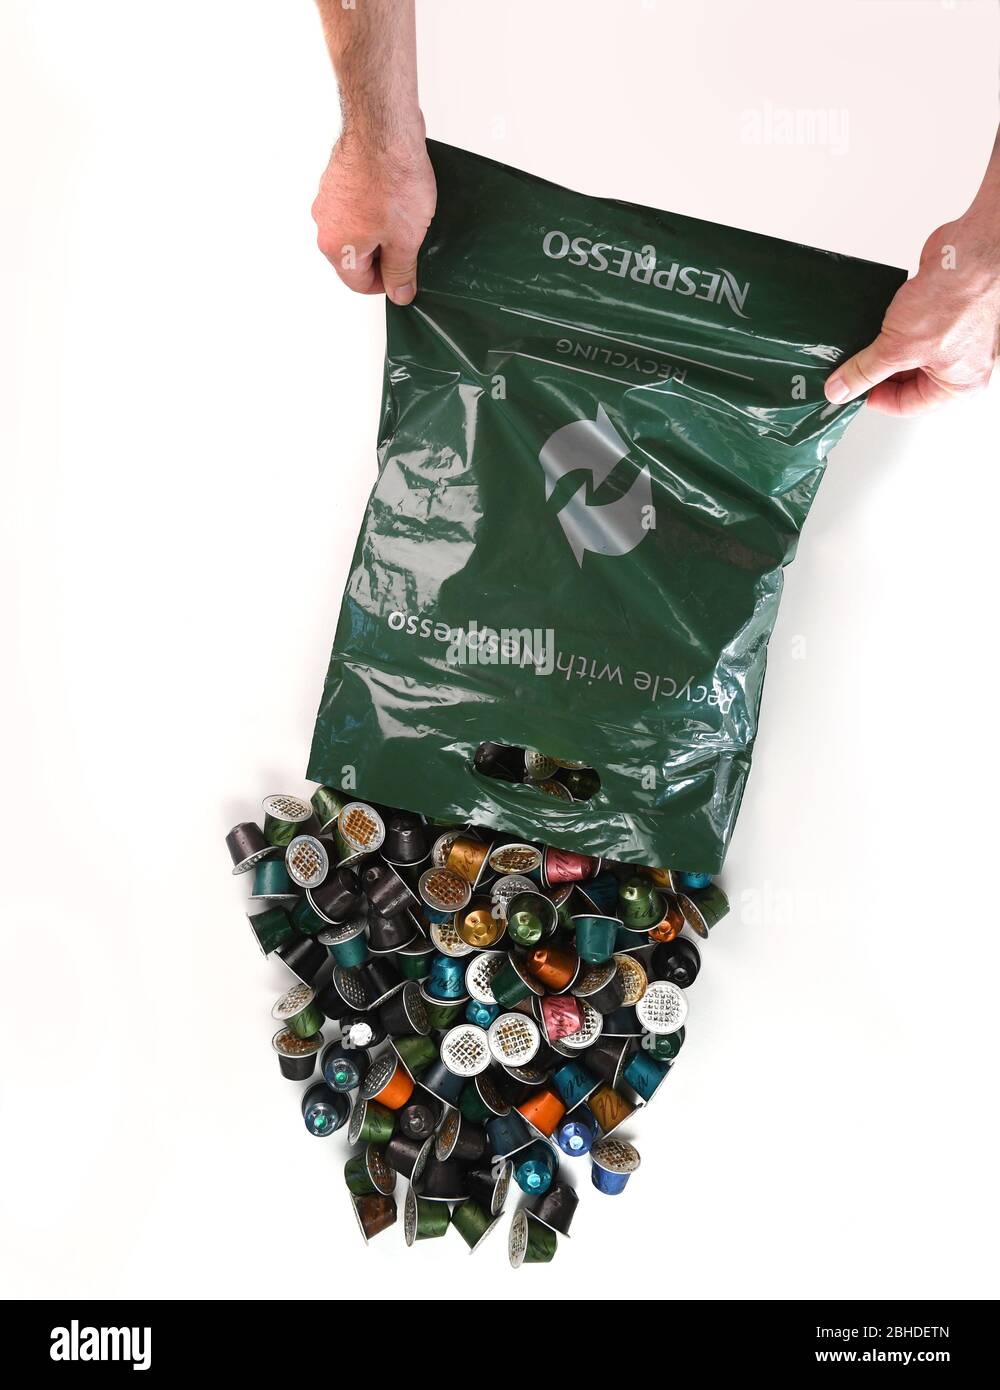 A Nespresso recycling bag in use with used coffee capsule pods on a white  background for isolation Stock Photo - Alamy